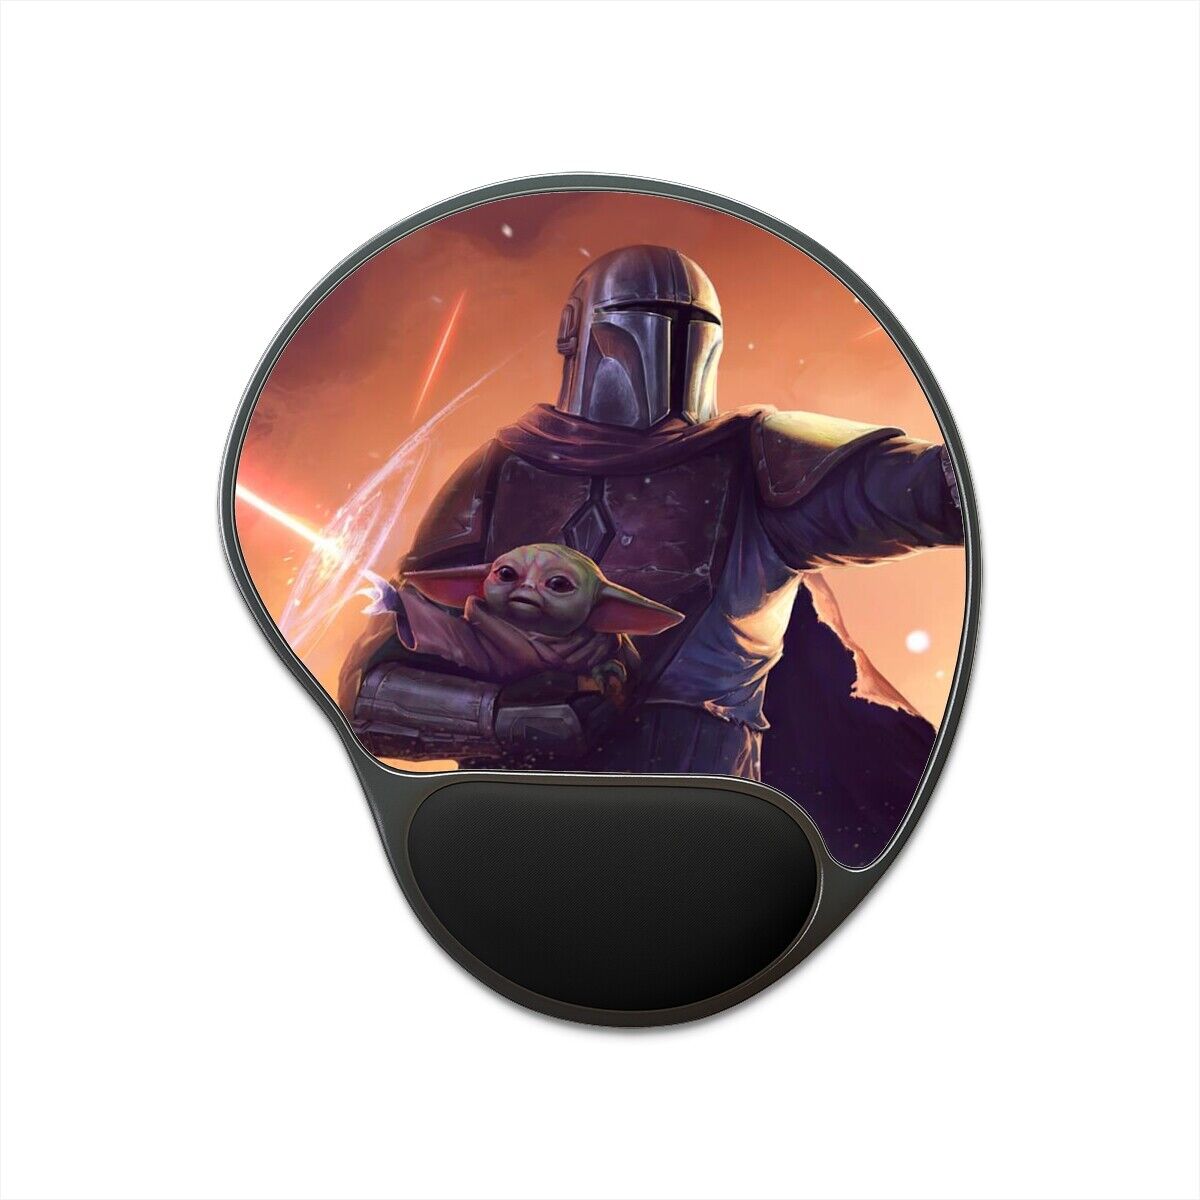 Star Wars The Mandalorian, Din Djarin and Baby Yoda, Mouse Pad With Wrist Rest